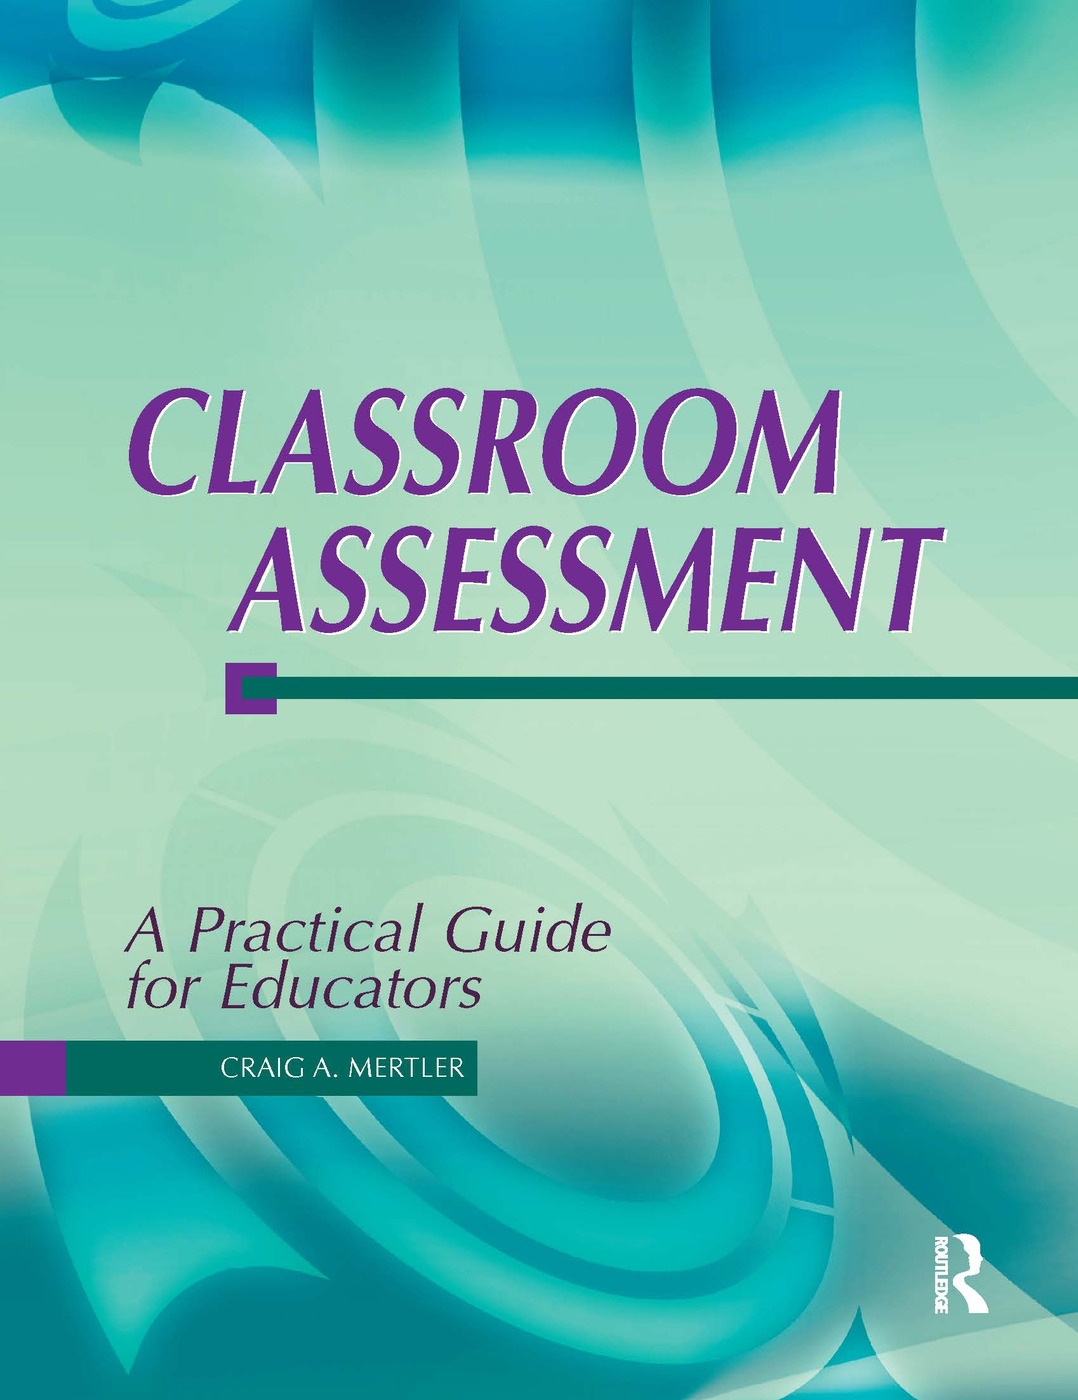 Classroom Assessment: A Practical Guide for Educators